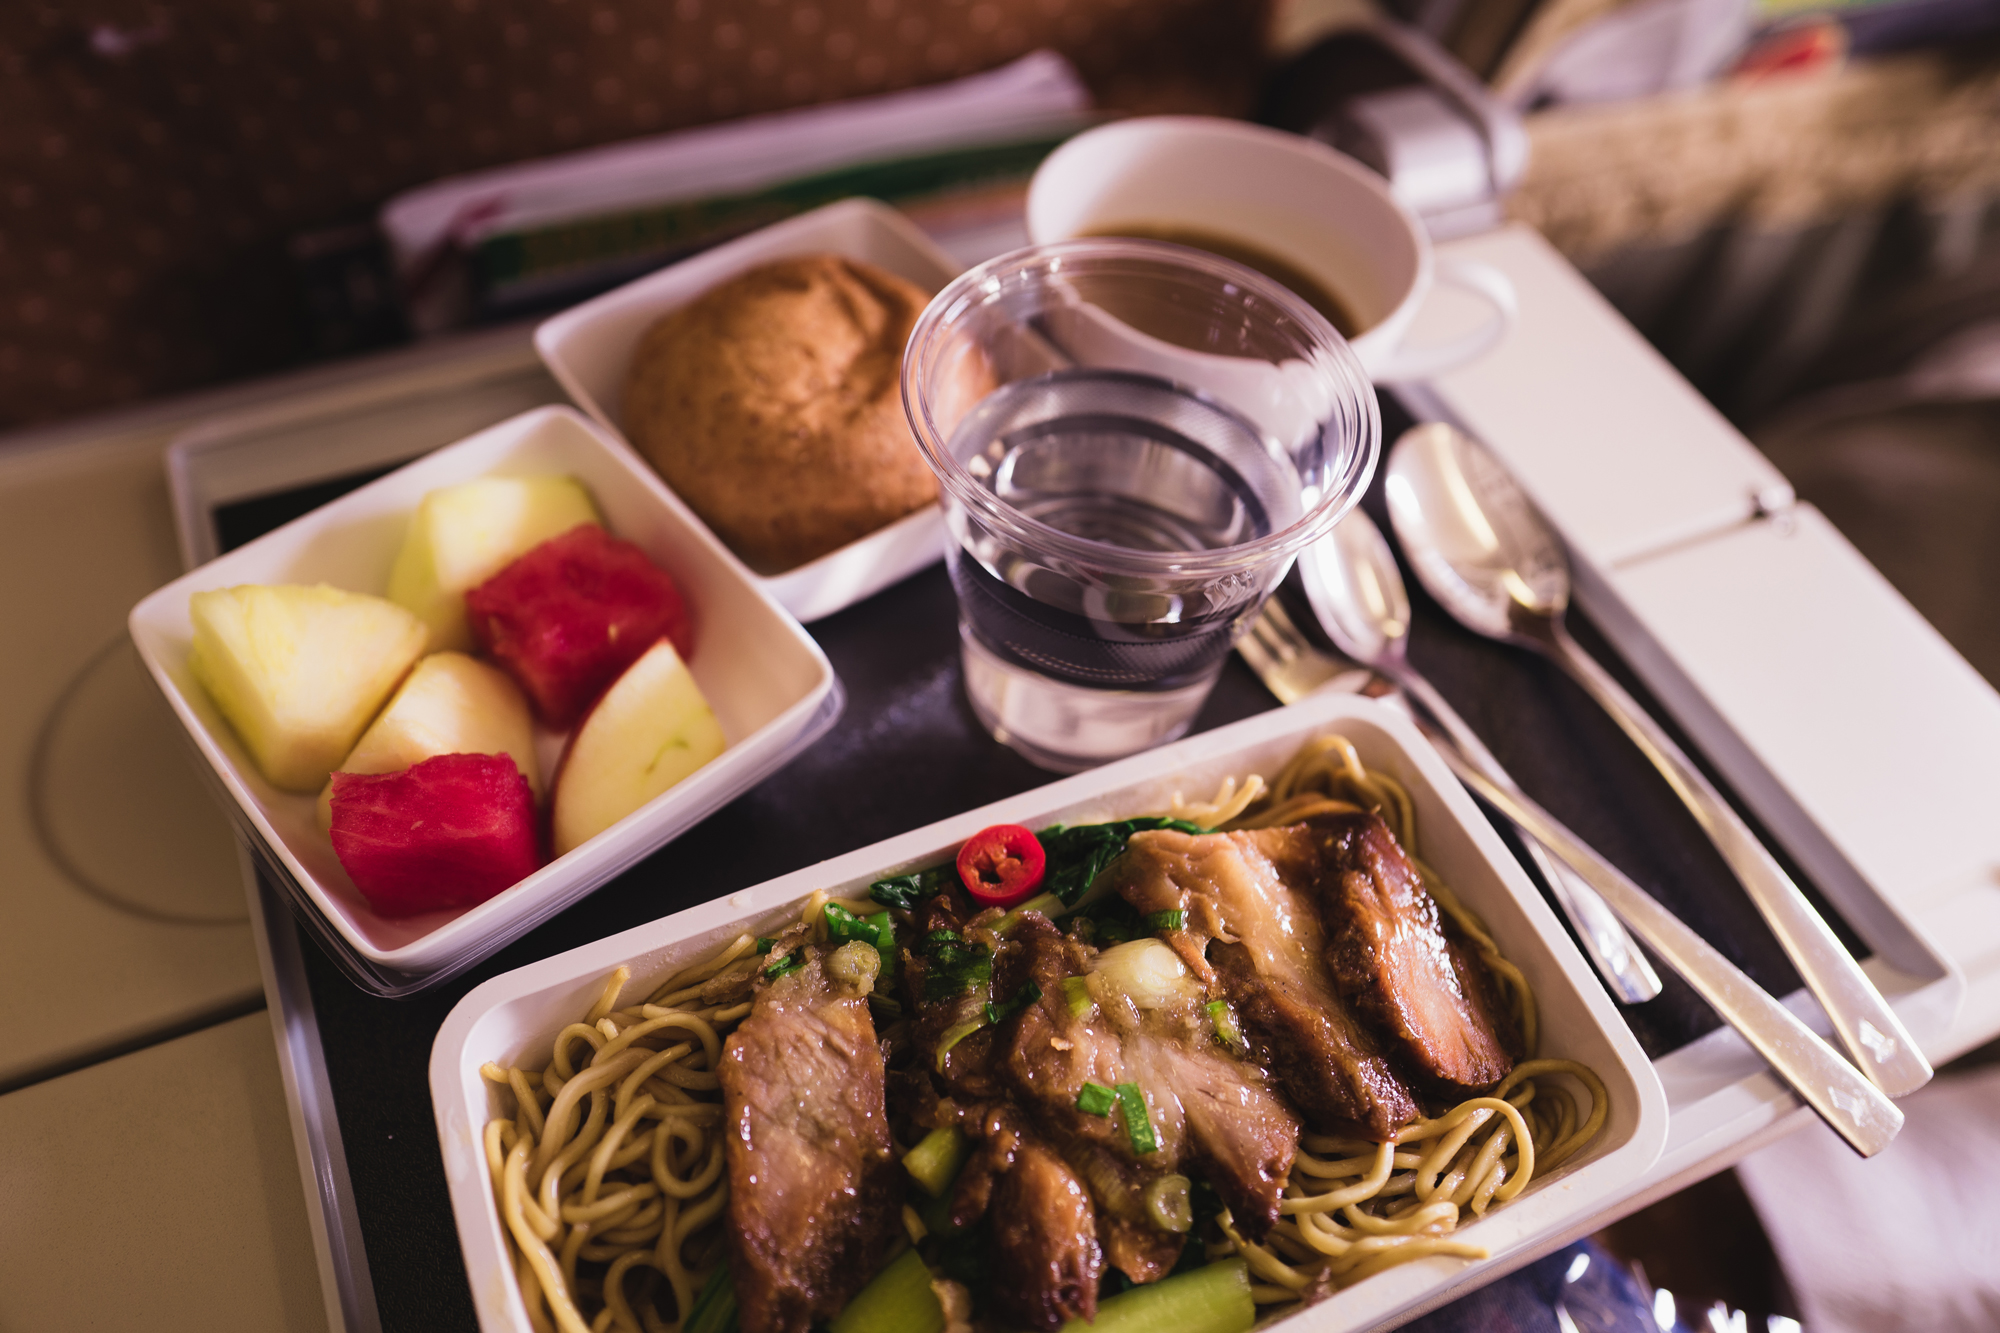 Sky-High Snacks Get a Cool Makeover As More Airlines To Offer Tasty Frozen Meals to Travelers